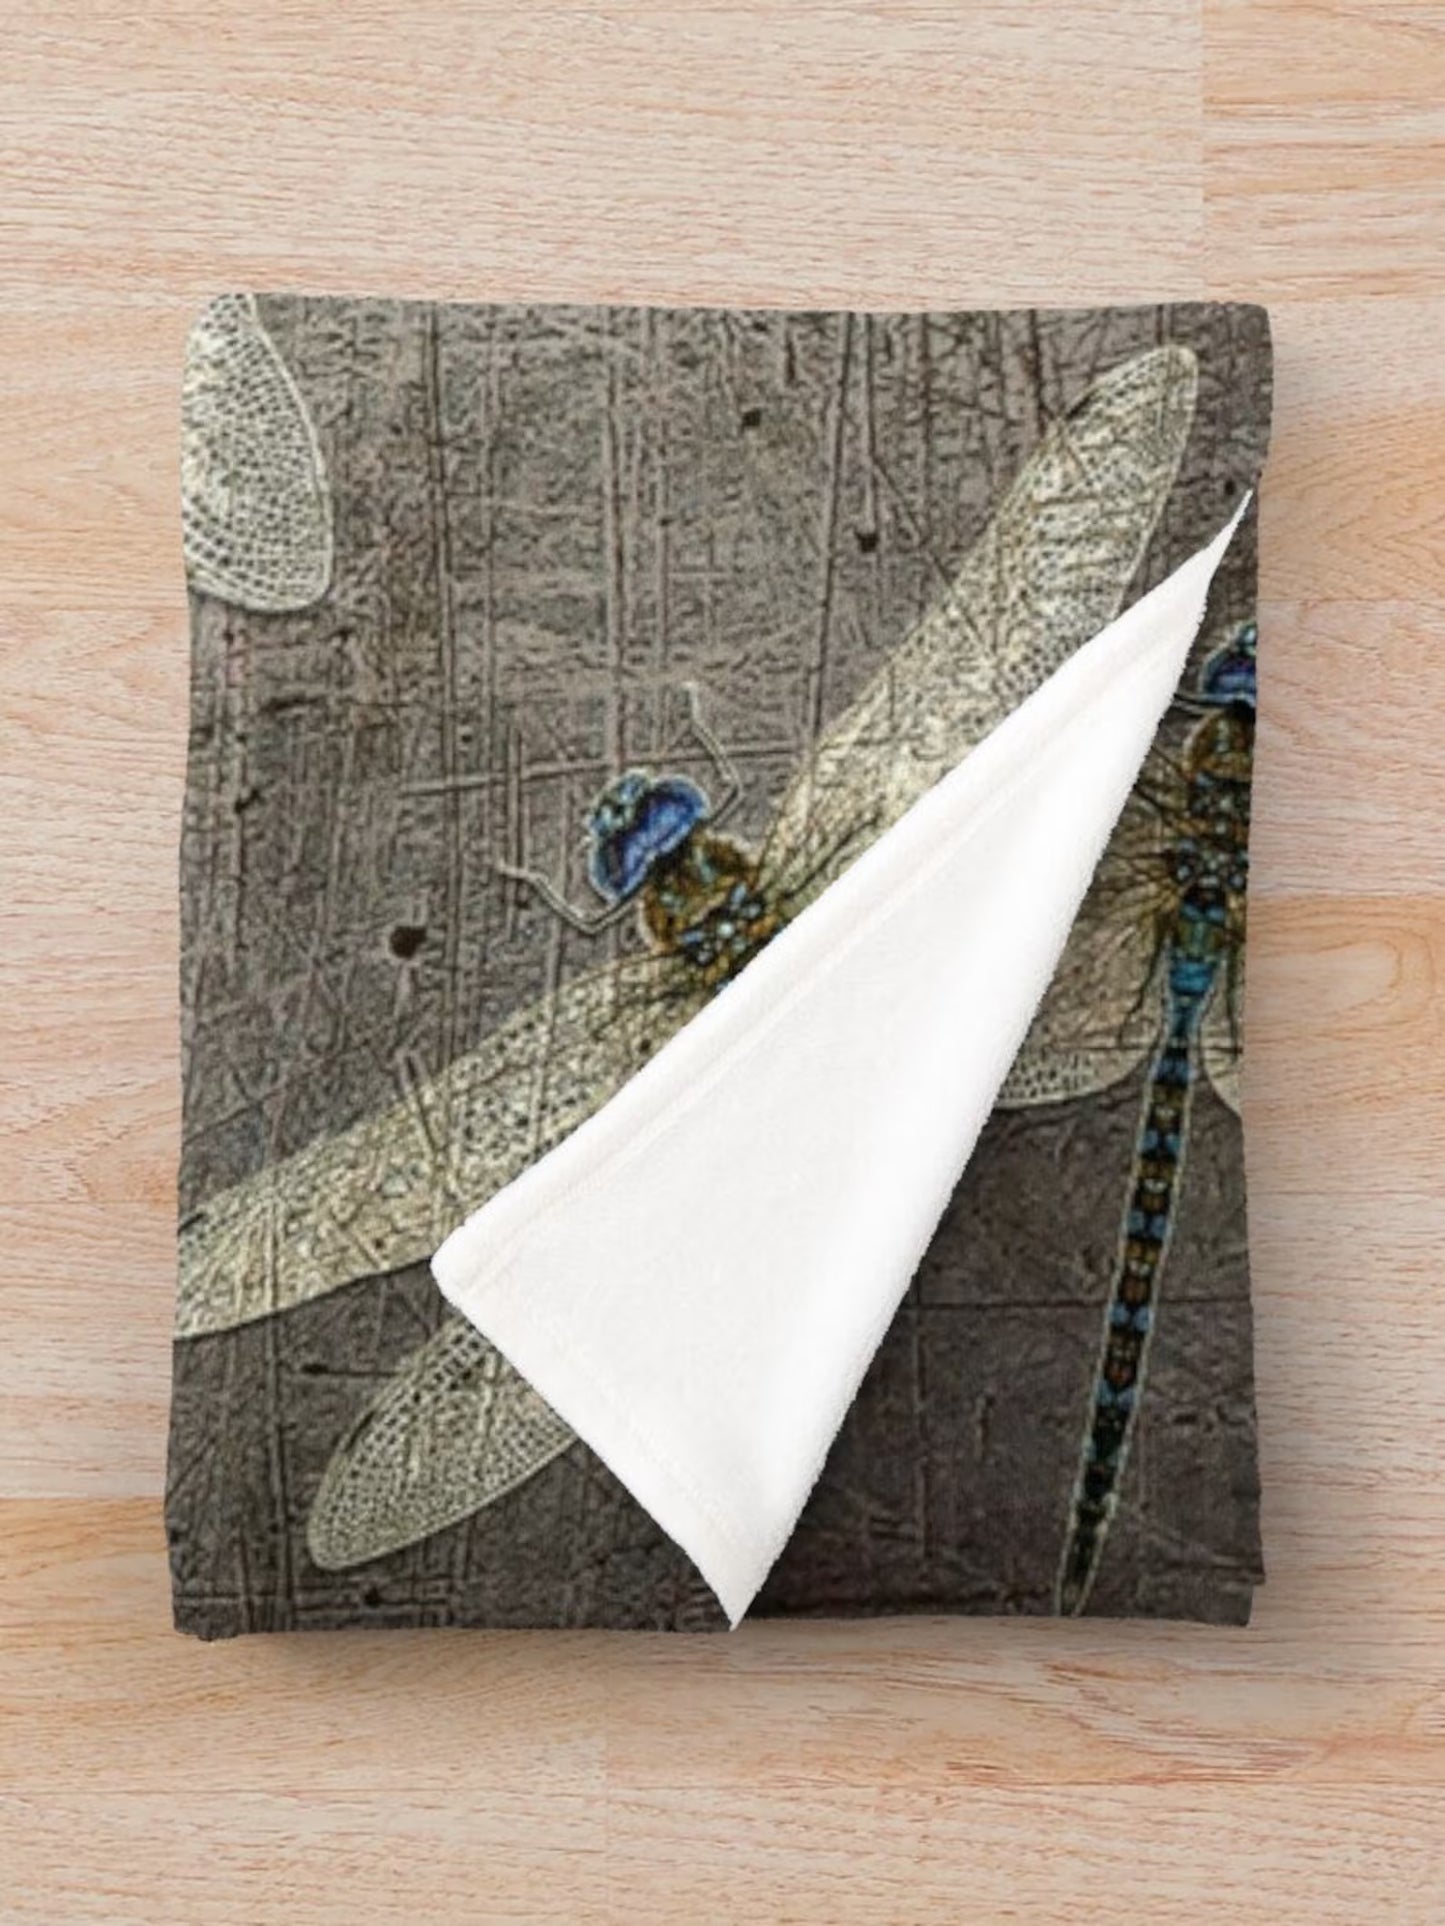 Dragonfly Themed Blankets - Flight of Dragonflies on Distressed Gray Stone Background Printed on Minky Blankets folded